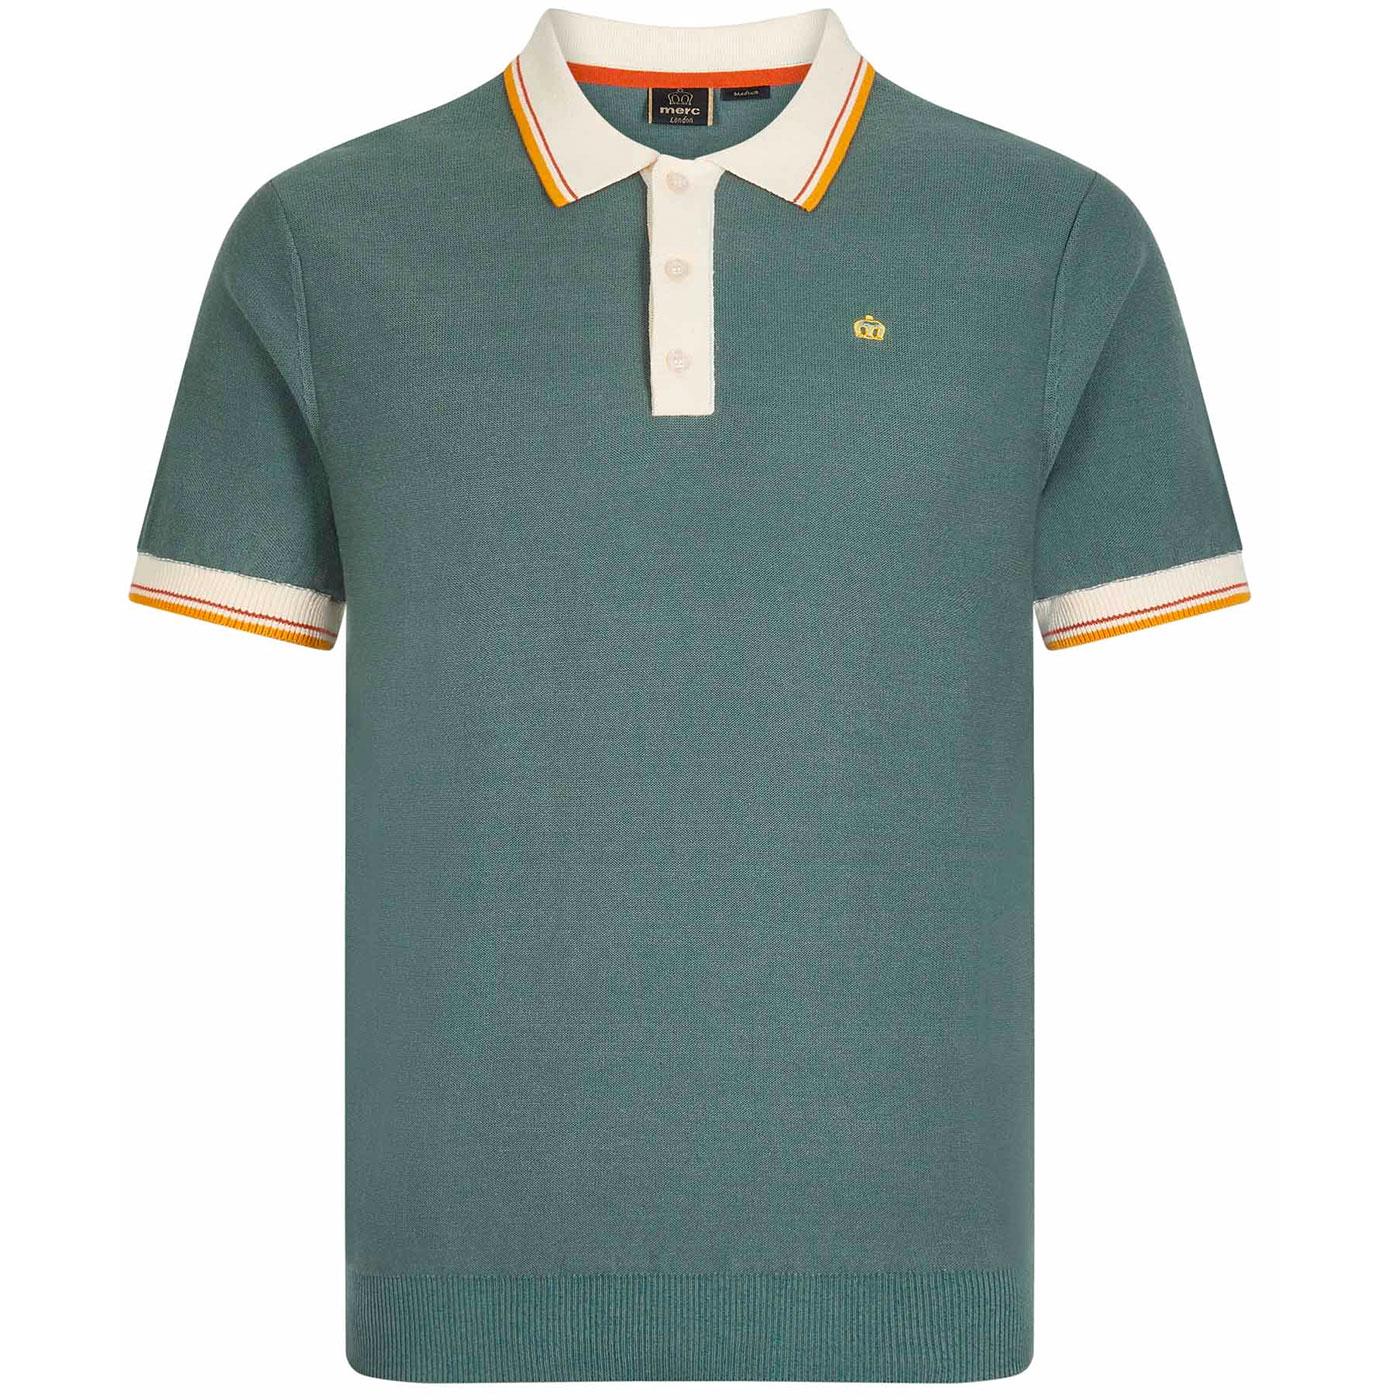 Anderson MERC Mod Contrast Collar Tipped Knit Polo